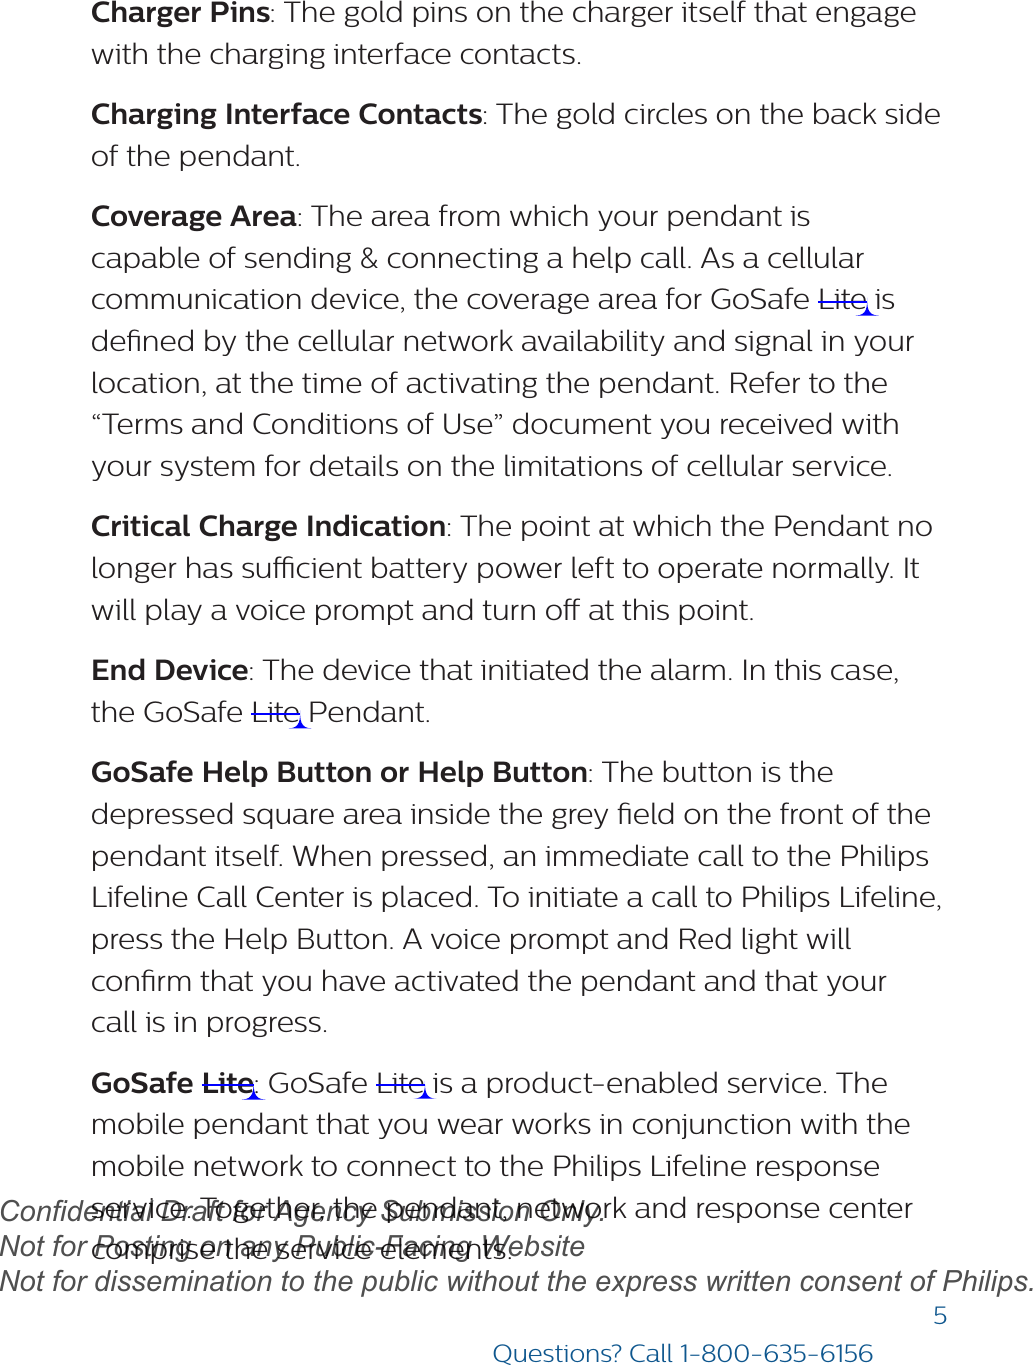 5Questions? Call 1-800-635-6156Charger Pins: The gold pins on the charger itself that engage with the charging interface contacts.Charging Interface Contacts: The gold circles on the back side of the pendant.  Coverage Area: The area from which your pendant is capable of sending &amp; connecting a help call. As a cellular communication device, the coverage area for GoSafe Lite is dened by the cellular network availability and signal in your location, at the time of activating the pendant. Refer to the “Terms and Conditions of Use” document you received with your system for details on the limitations of cellular service.Critical Charge Indication: The point at which the Pendant no longer has sucient battery power left to operate normally. It will play a voice prompt and turn o at this point. End Device: The device that initiated the alarm. In this case, the GoSafe Lite Pendant.GoSafe Help Button or Help Button: The button is the depressed square area inside the grey eld on the front of the pendant itself. When pressed, an immediate call to the Philips Lifeline Call Center is placed. To initiate a call to Philips Lifeline, press the Help Button. A voice prompt and Red light will conrm that you have activated the pendant and that your  call is in progress.GoSafe Lite: GoSafe Lite is a product-enabled service. The mobile pendant that you wear works in conjunction with the mobile network to connect to the Philips Lifeline response service. Together, the pendant, network and response center comprise the service elements.draftConfidential Draft for Agency Submission Only.   Not for Posting on any Public-Facing Website Not for dissemination to the public without the express written consent of Philips.